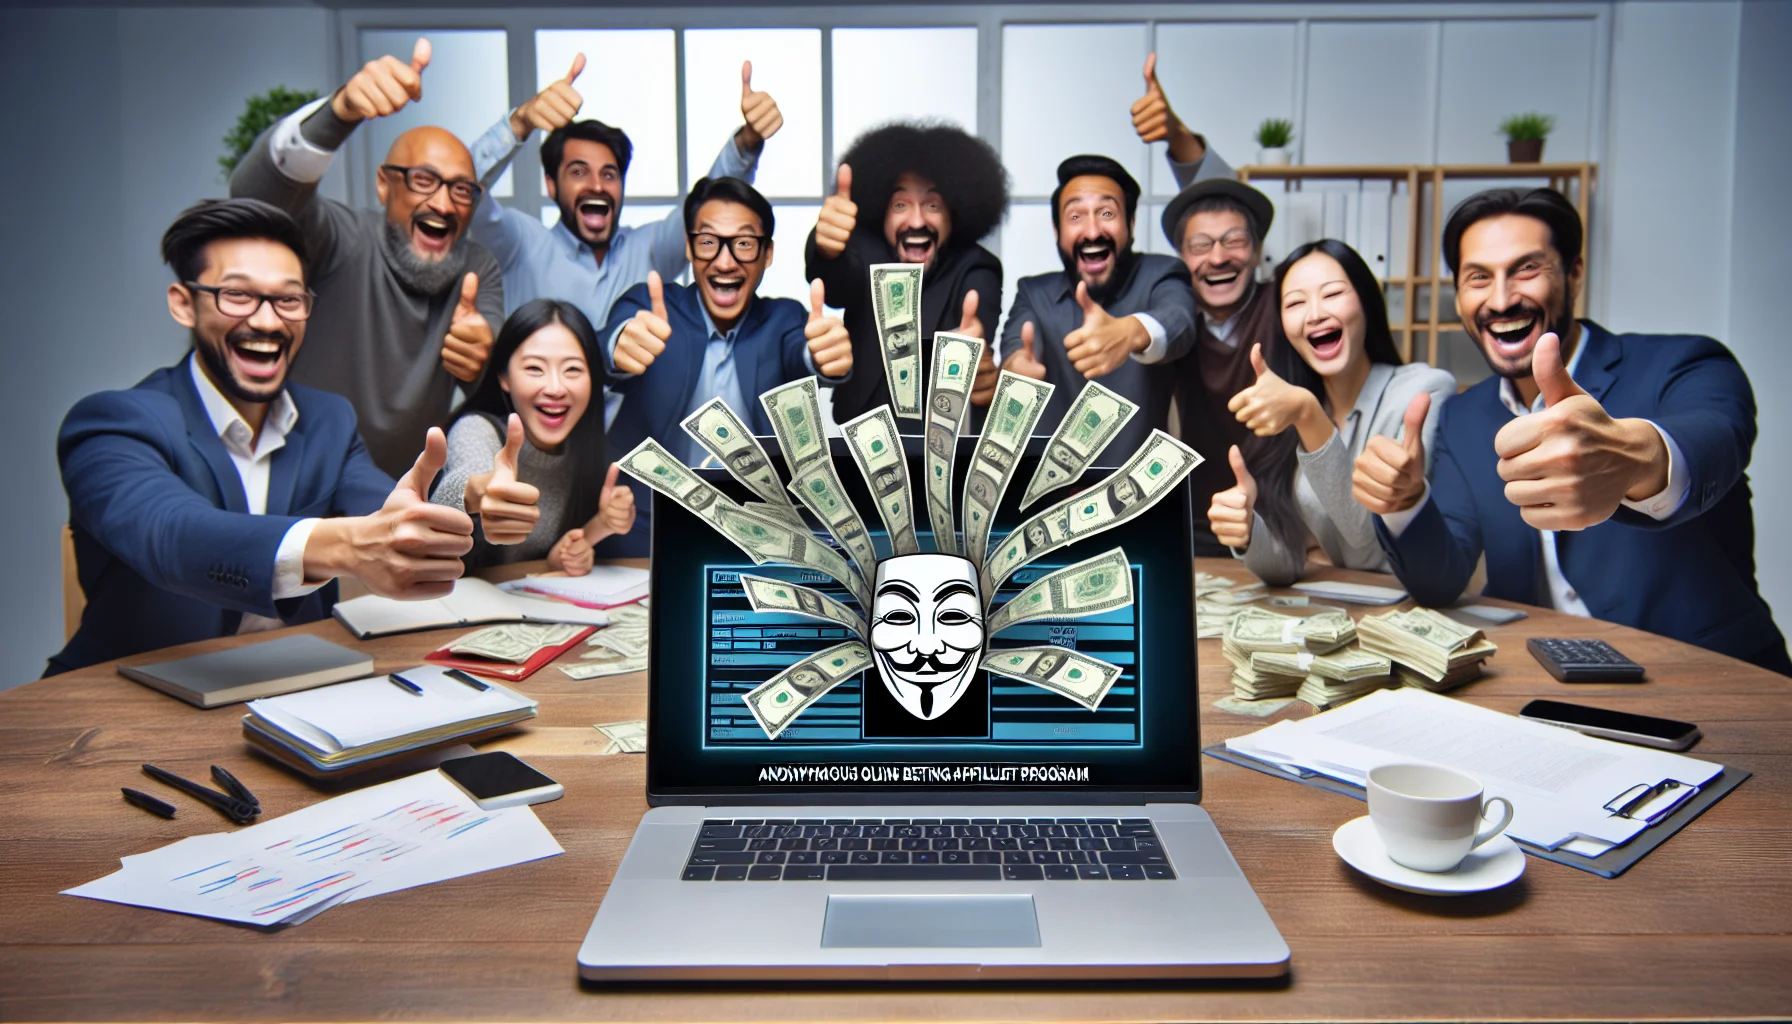 Create a comedic and realistic image showing an anonymous online betting affiliate program being endorsed in an enticing scenario related to making money online. Imagine a laptop screen displaying high returns. Around the laptop, a multi-ethnic array of people, men and women of Asian, Caucasian, Hispanic, African and Middle Eastern heritage, hold their thumbs up in approval. Paper money appears to be spouting from the laptop screen, and the whole scenario is casually organized in a comfortable and homely office environment.